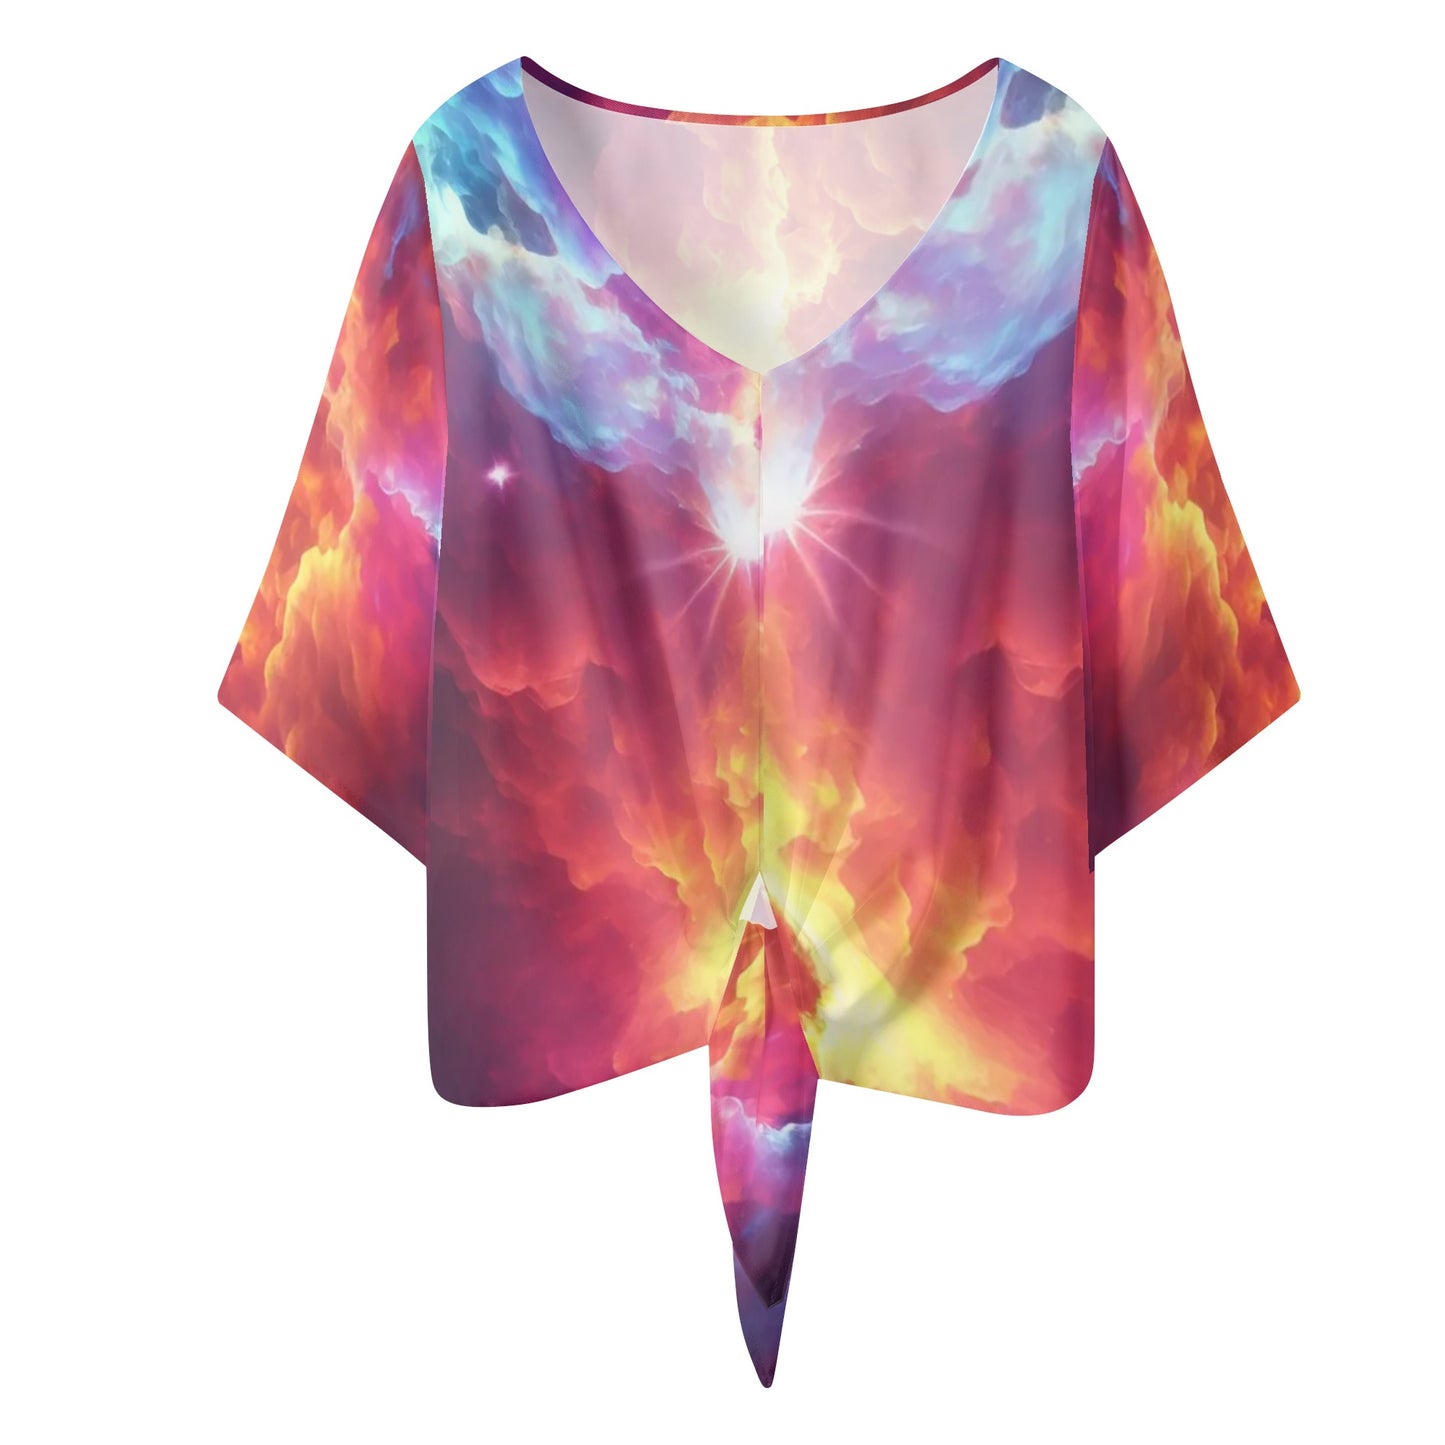 Out of this World- Women‘s’ V-neck Tie Front Knot Chiffon Blouse